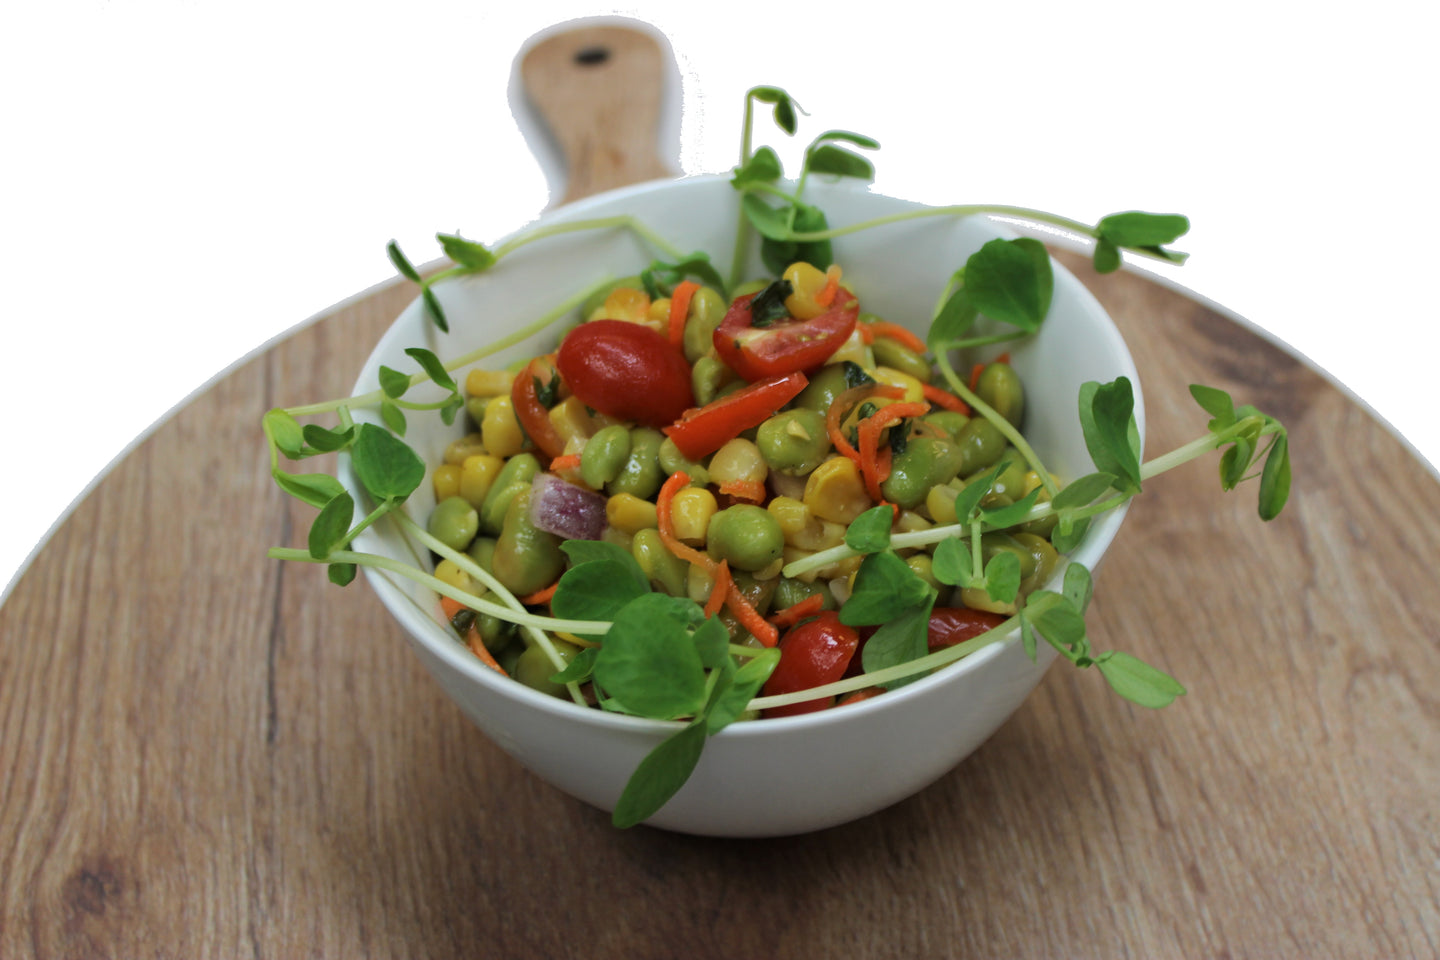 Edamame Salad made by Ely's Fine Foods in GTA